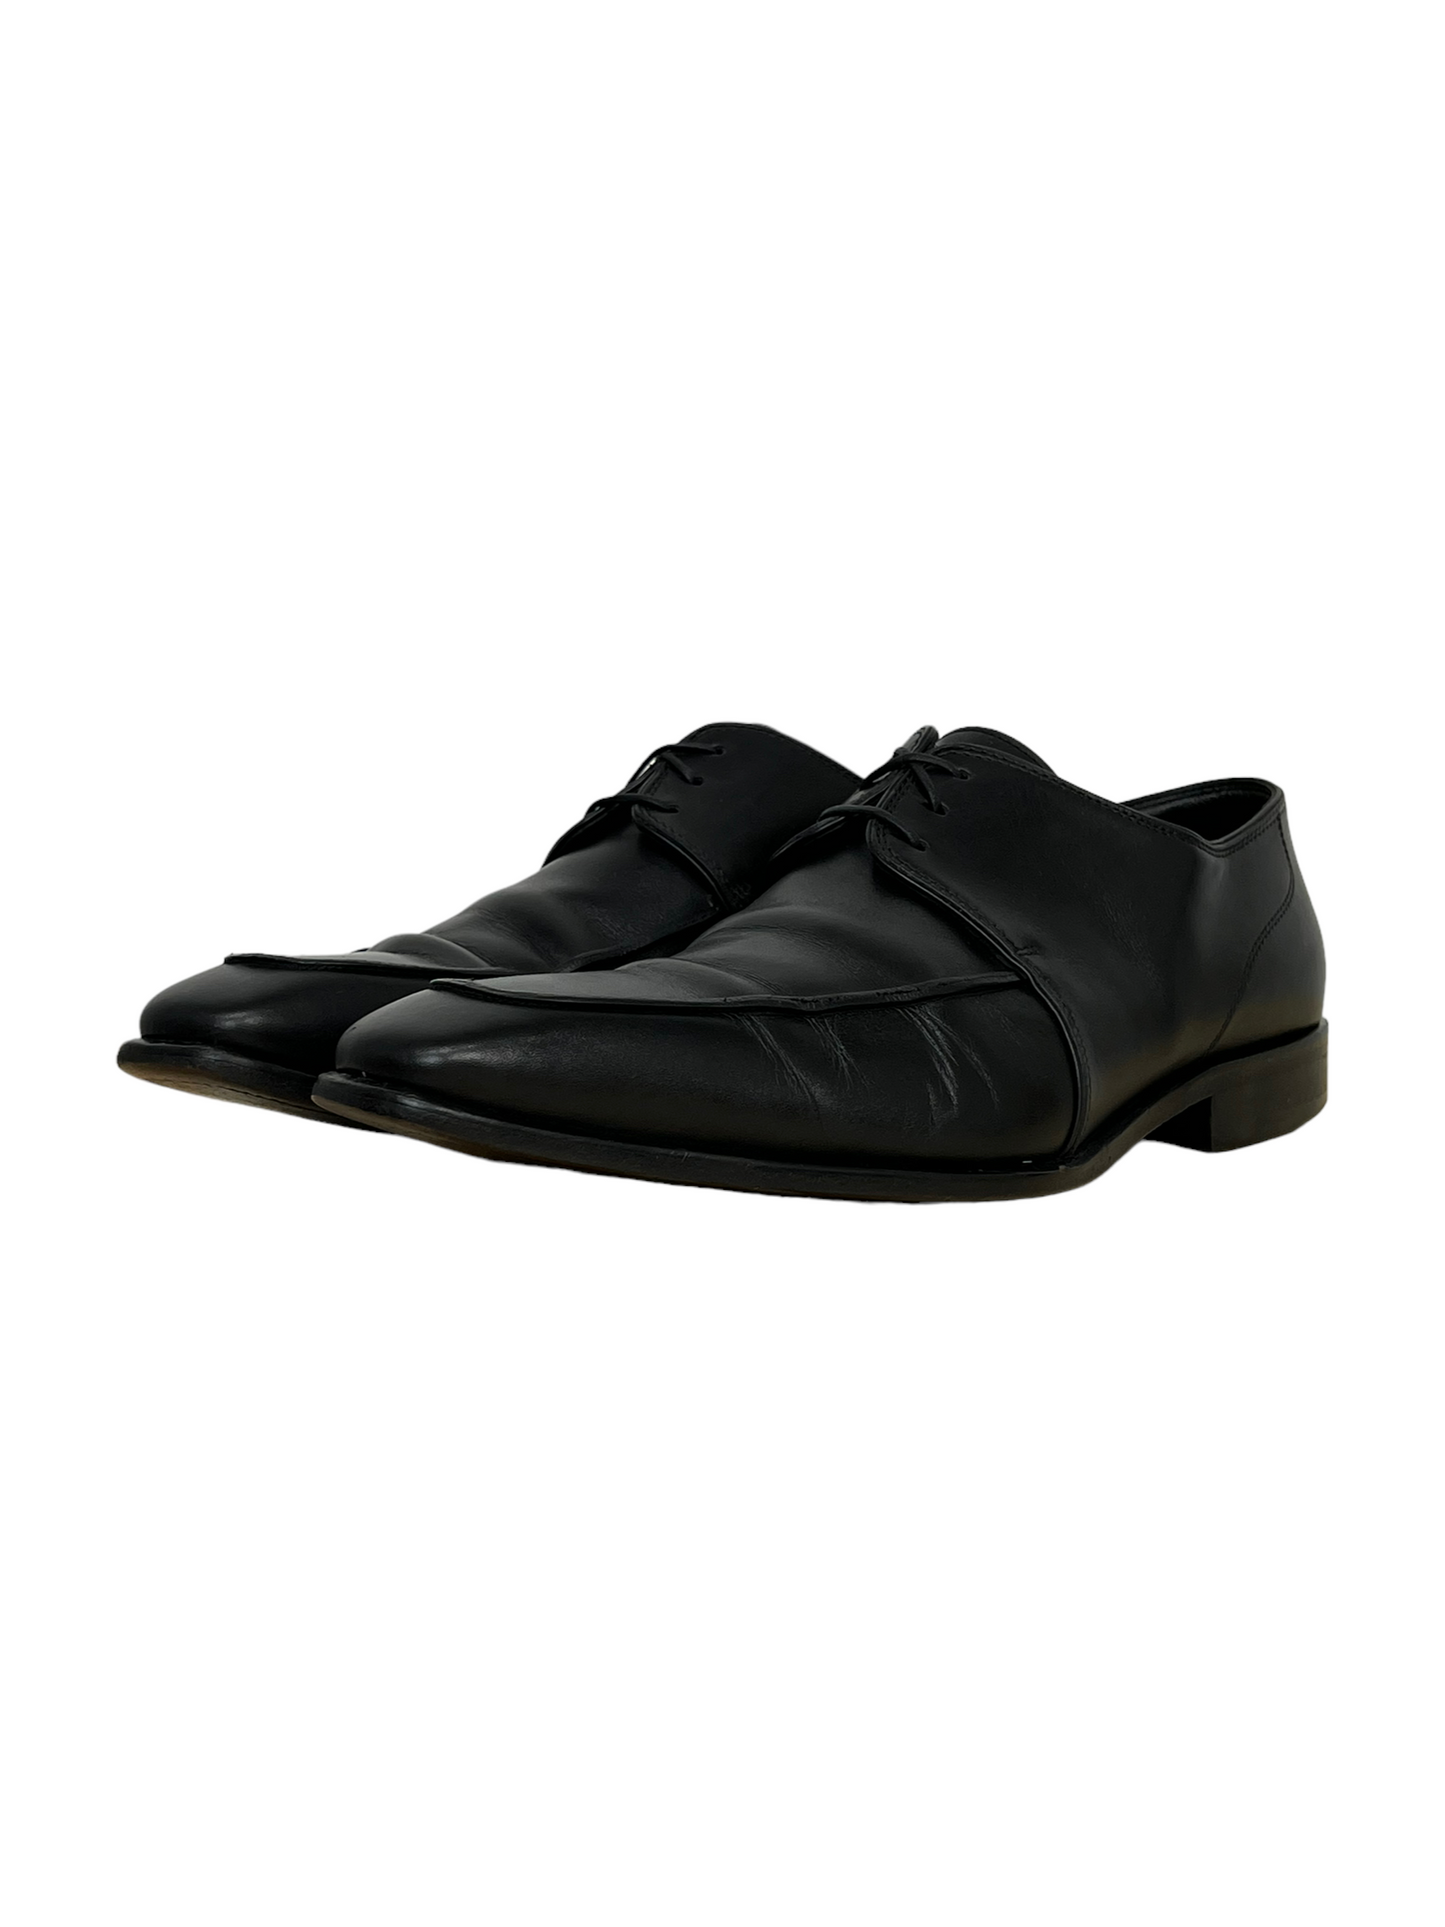 Hugo Boss Black Leather Derby Dress Shoe - Genuine Design Luxury Consignment for Men. New & Pre-Owned Clothing, Shoes, & Accessories. Calgary, Canada